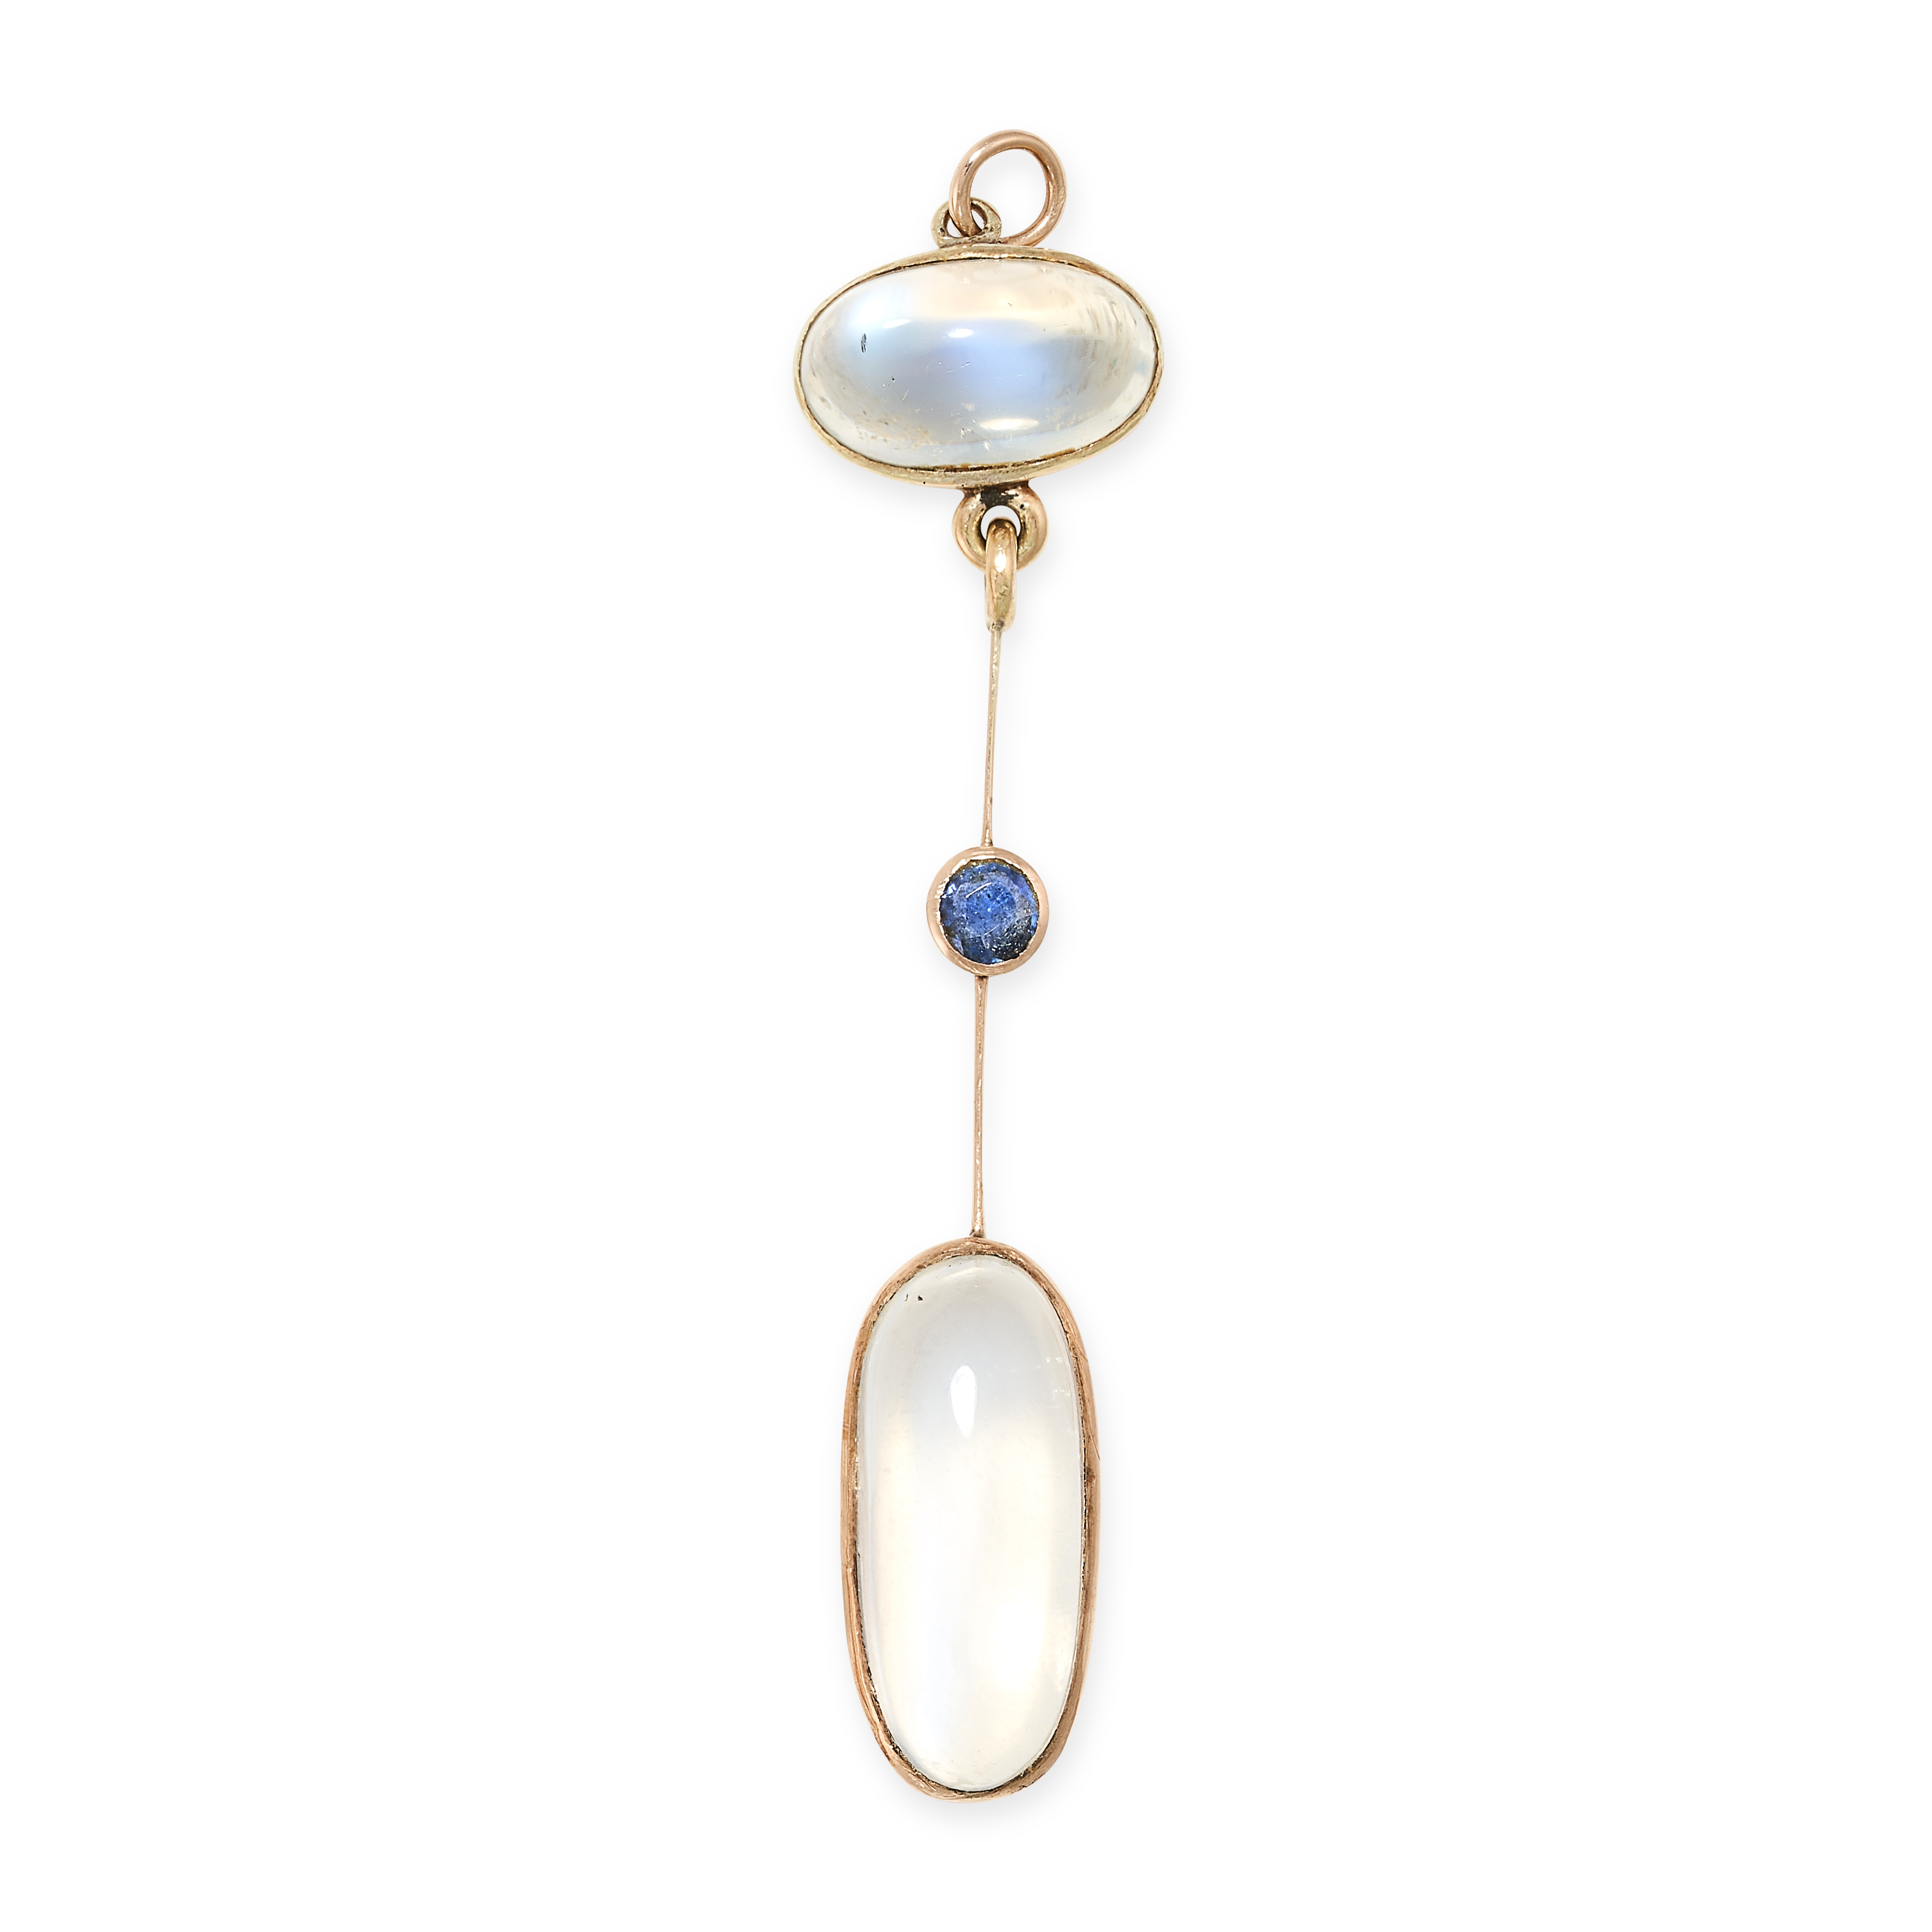 AN ANTIQUE MOONSTONE AND SAPPHIRE PENDANT in yellow gold, set with two cabochon moonstones and a